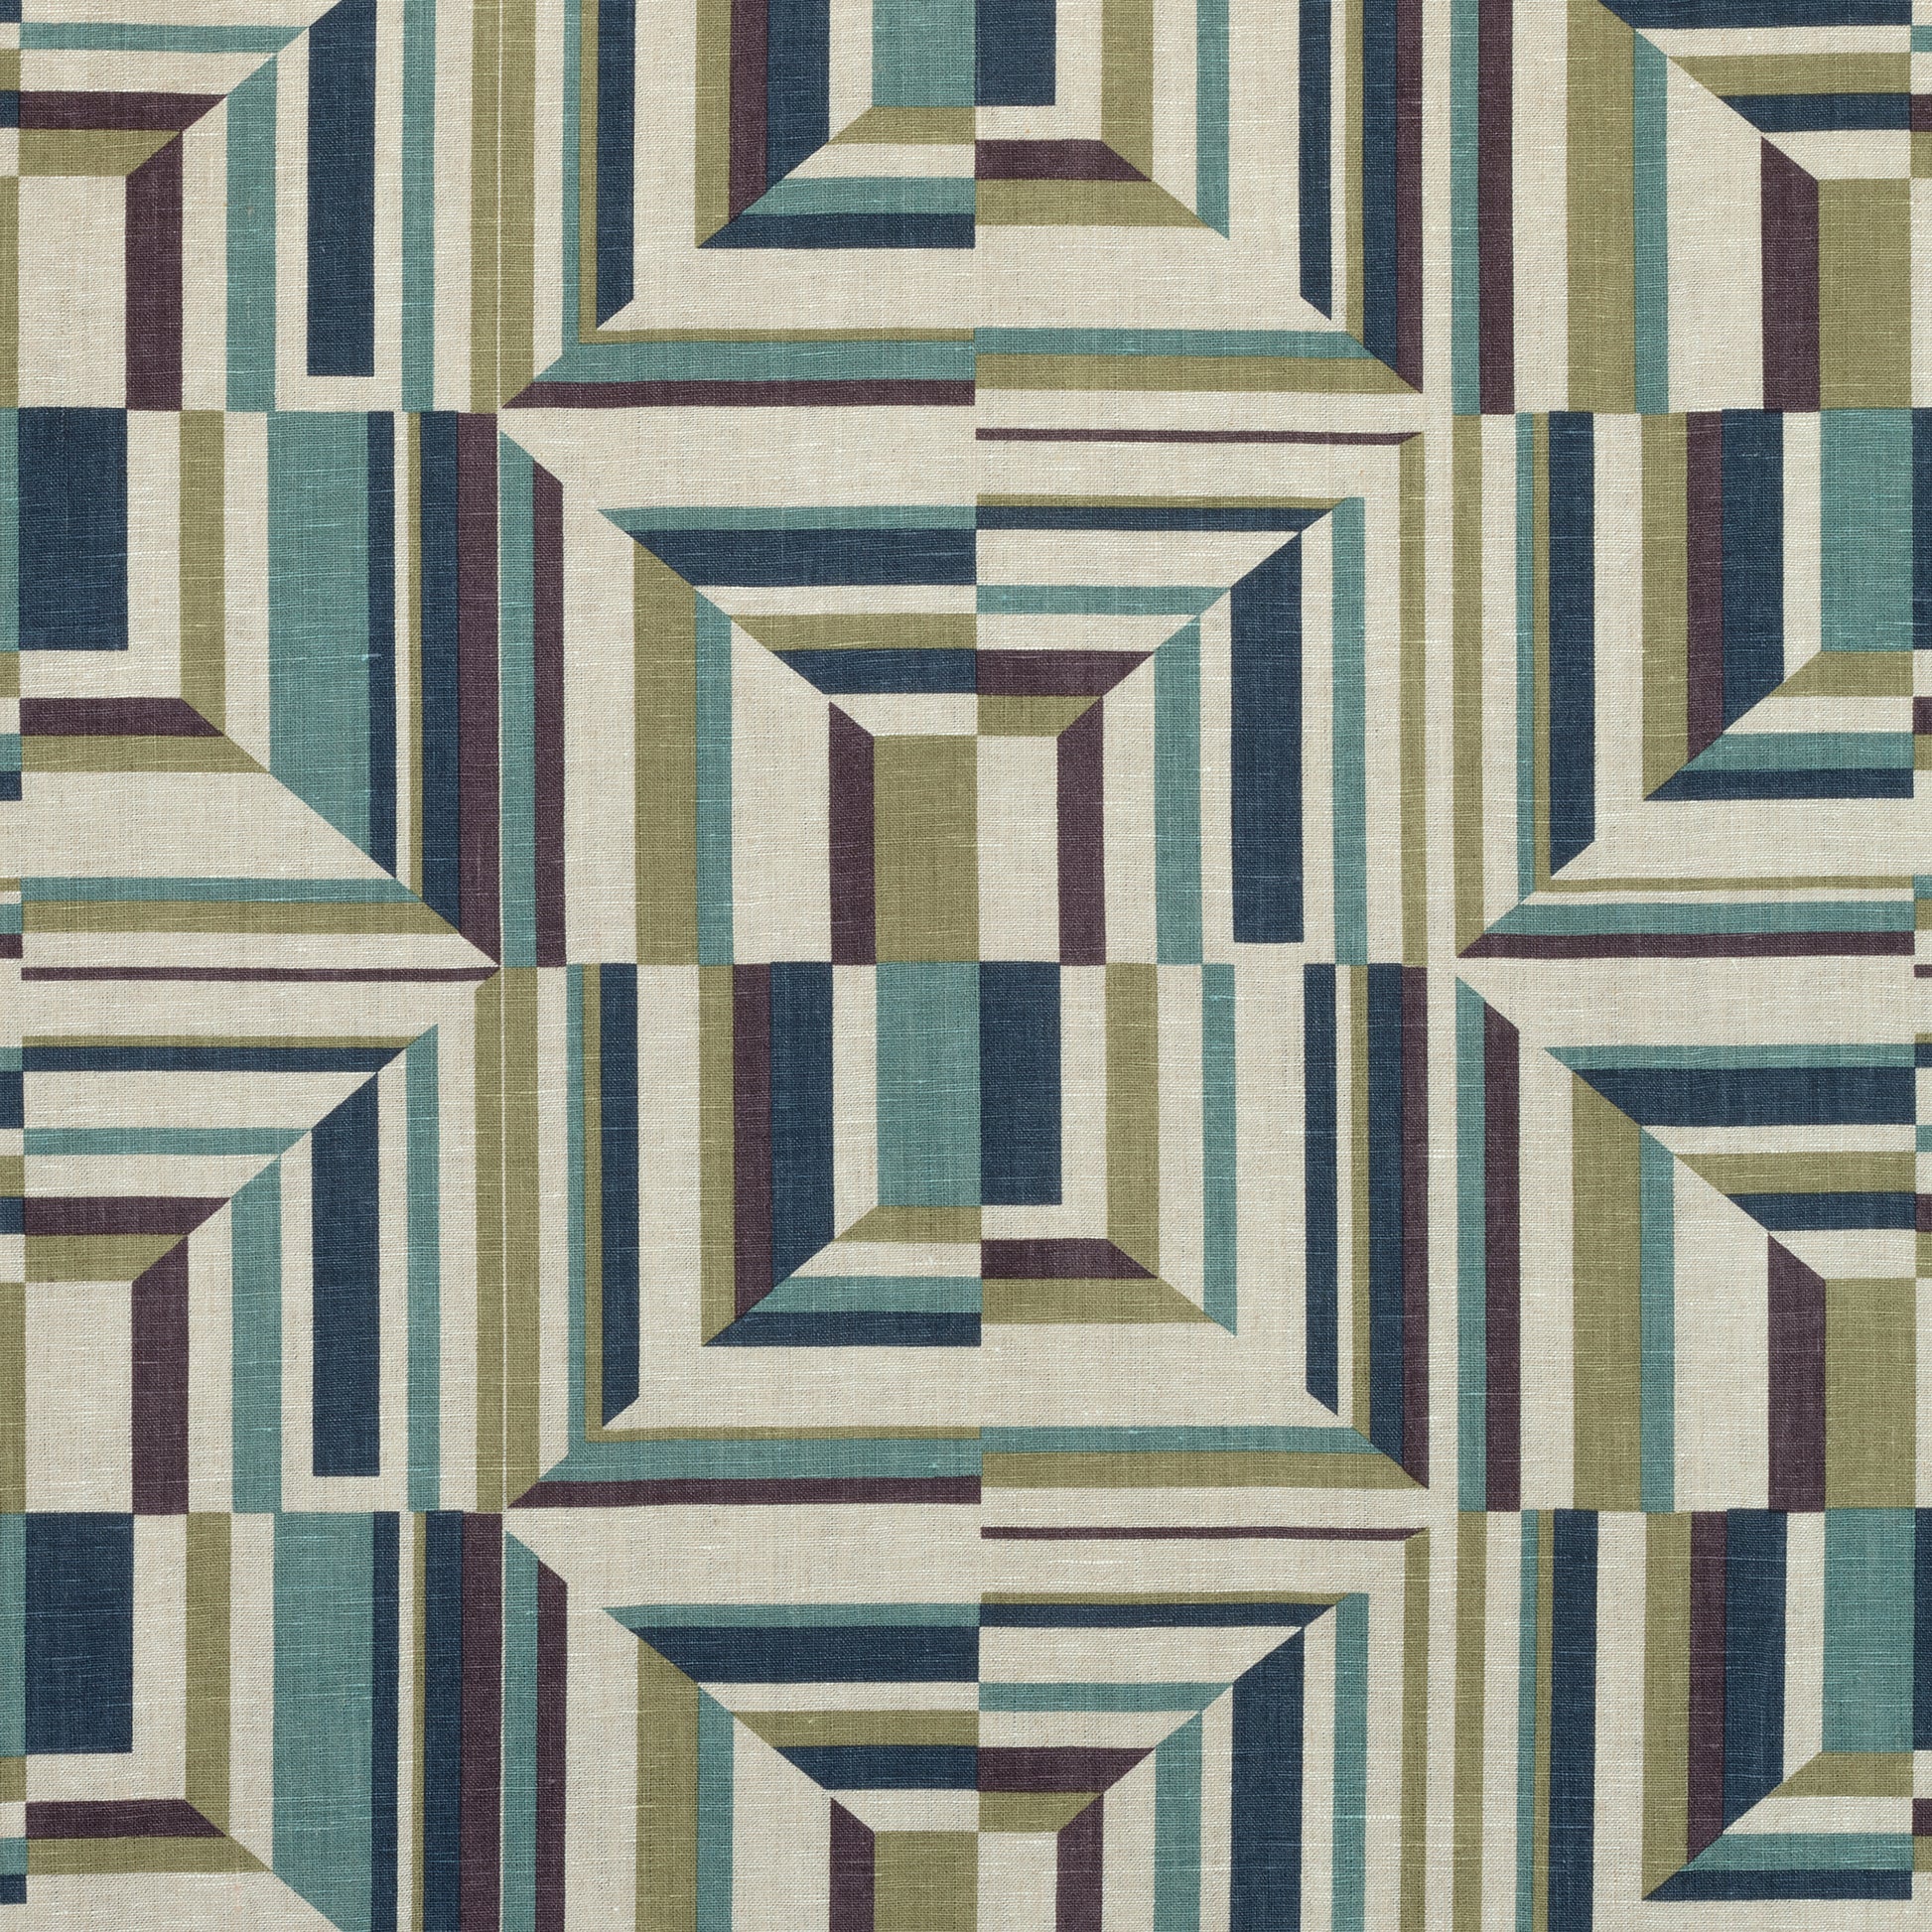 Purchase  Ann French Fabric Product AF9651  pattern name  Cubism